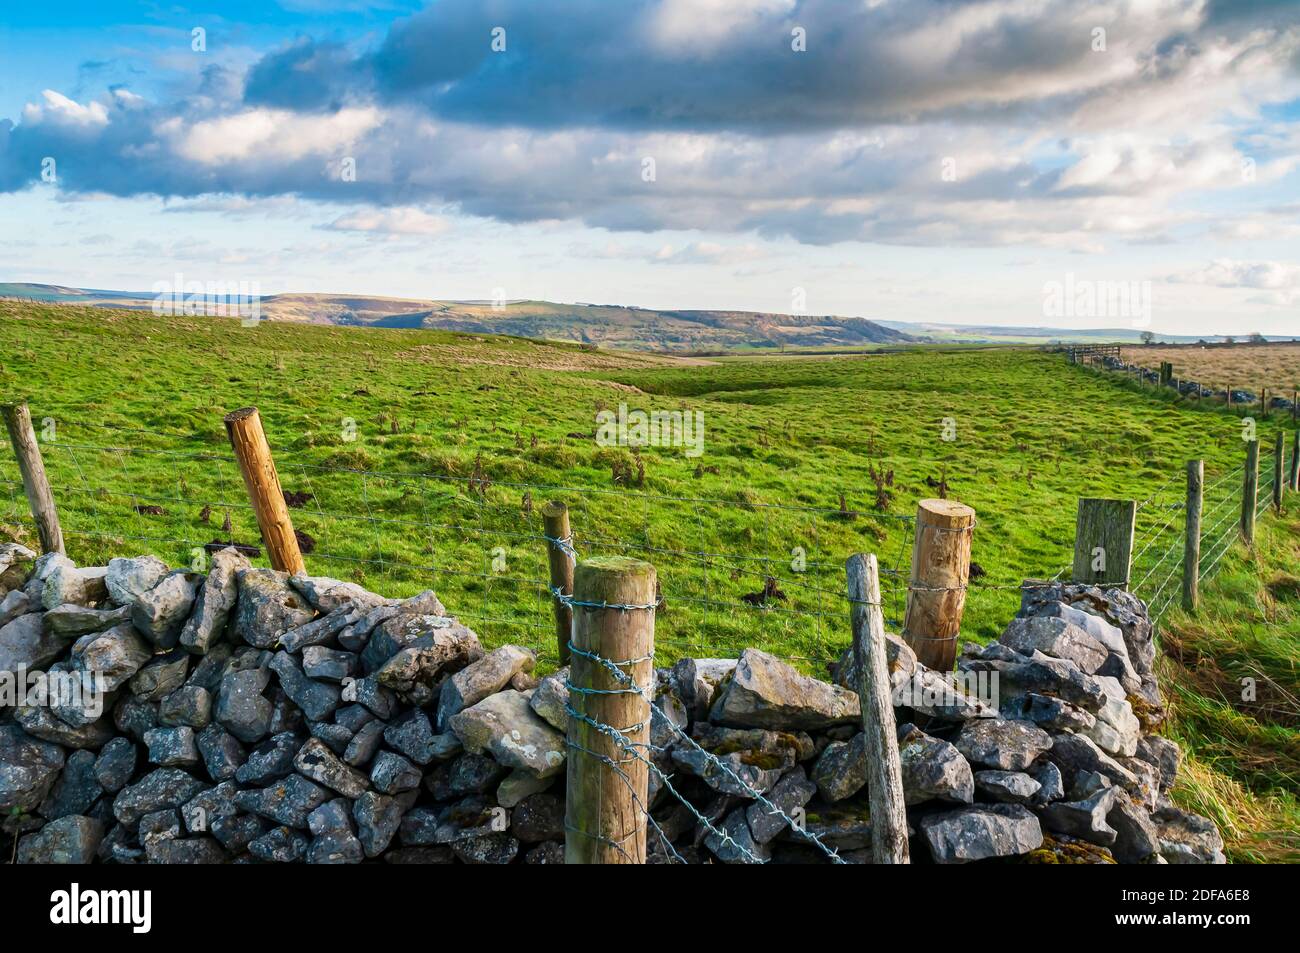 Drystone wall overlooking a field with a sinkhole or doline, in a view toward Hucklow Edge on Bradwell Moor near Castleton, Derbyshire. Stock Photo